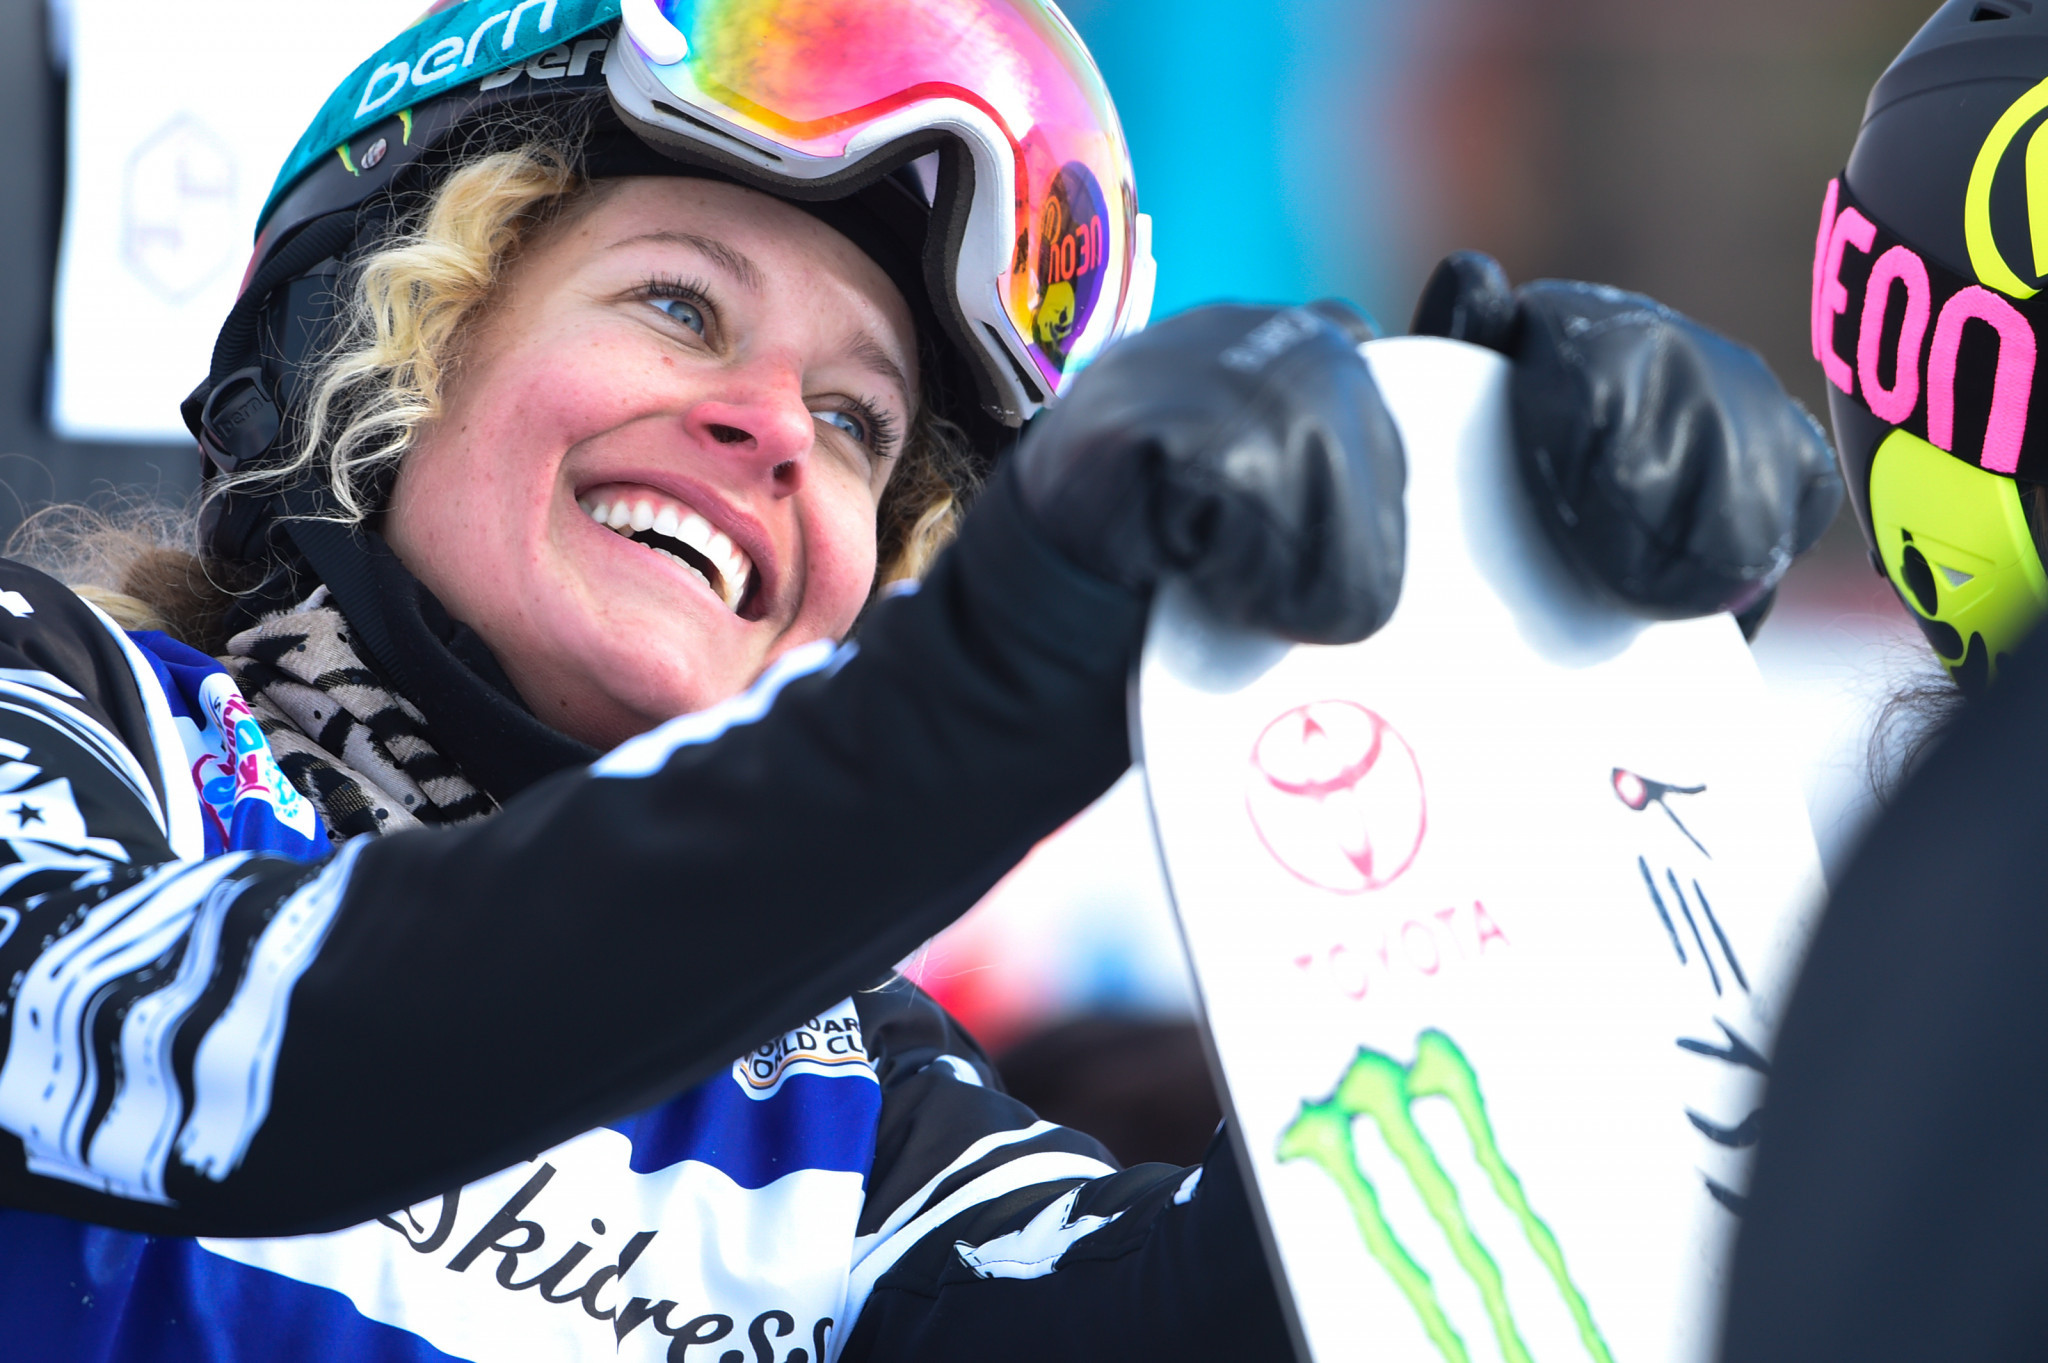 Lindsey Jacobellis will be hoping to extend her lead at the top of the women's FIS Snowboard Cross World Cup leaderboard ©Getty Images